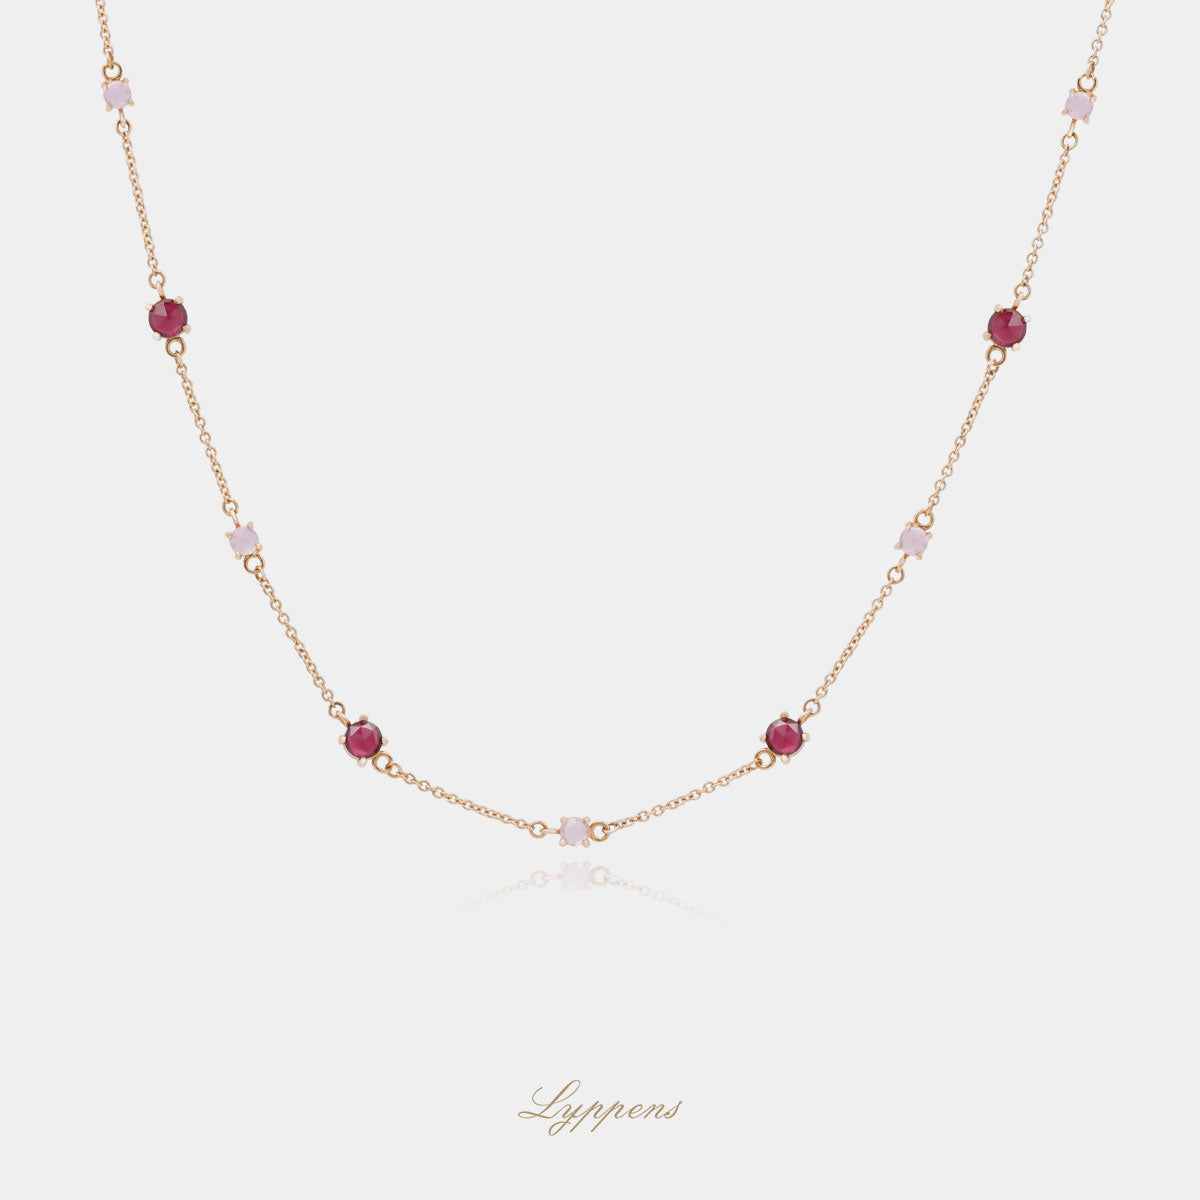 Rose gold necklace with rhodolite and pink sapphire